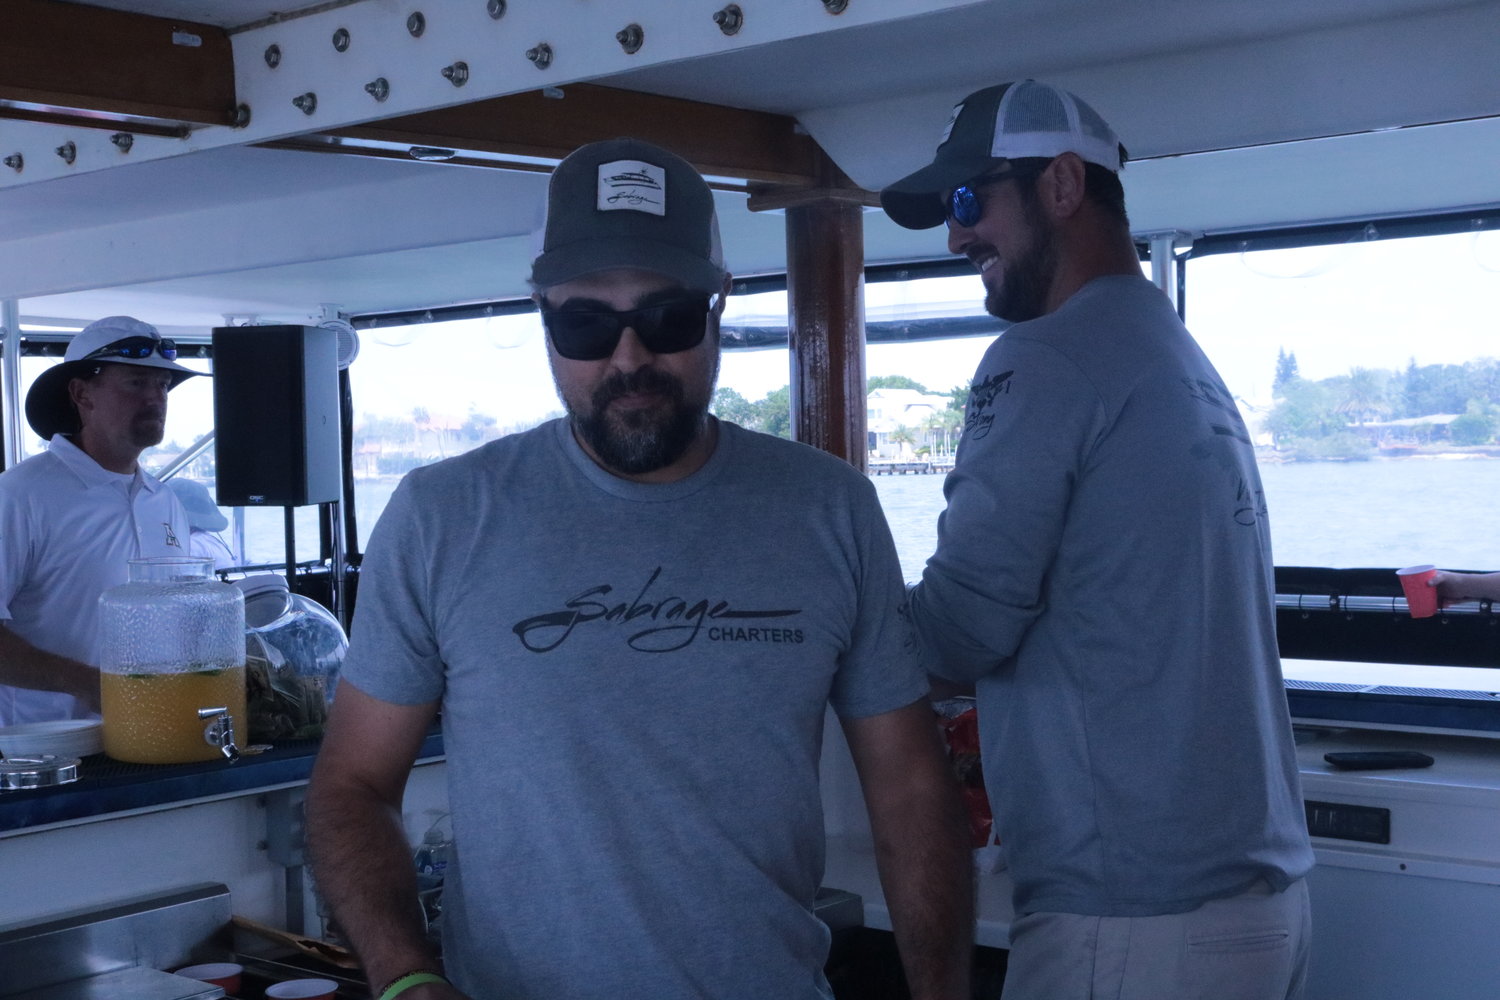 Ian Bartlett (right) and Jon Cordero, of Sabrage Charters, serve guests at the Sister Hazel Booze Cruise last Sunday.